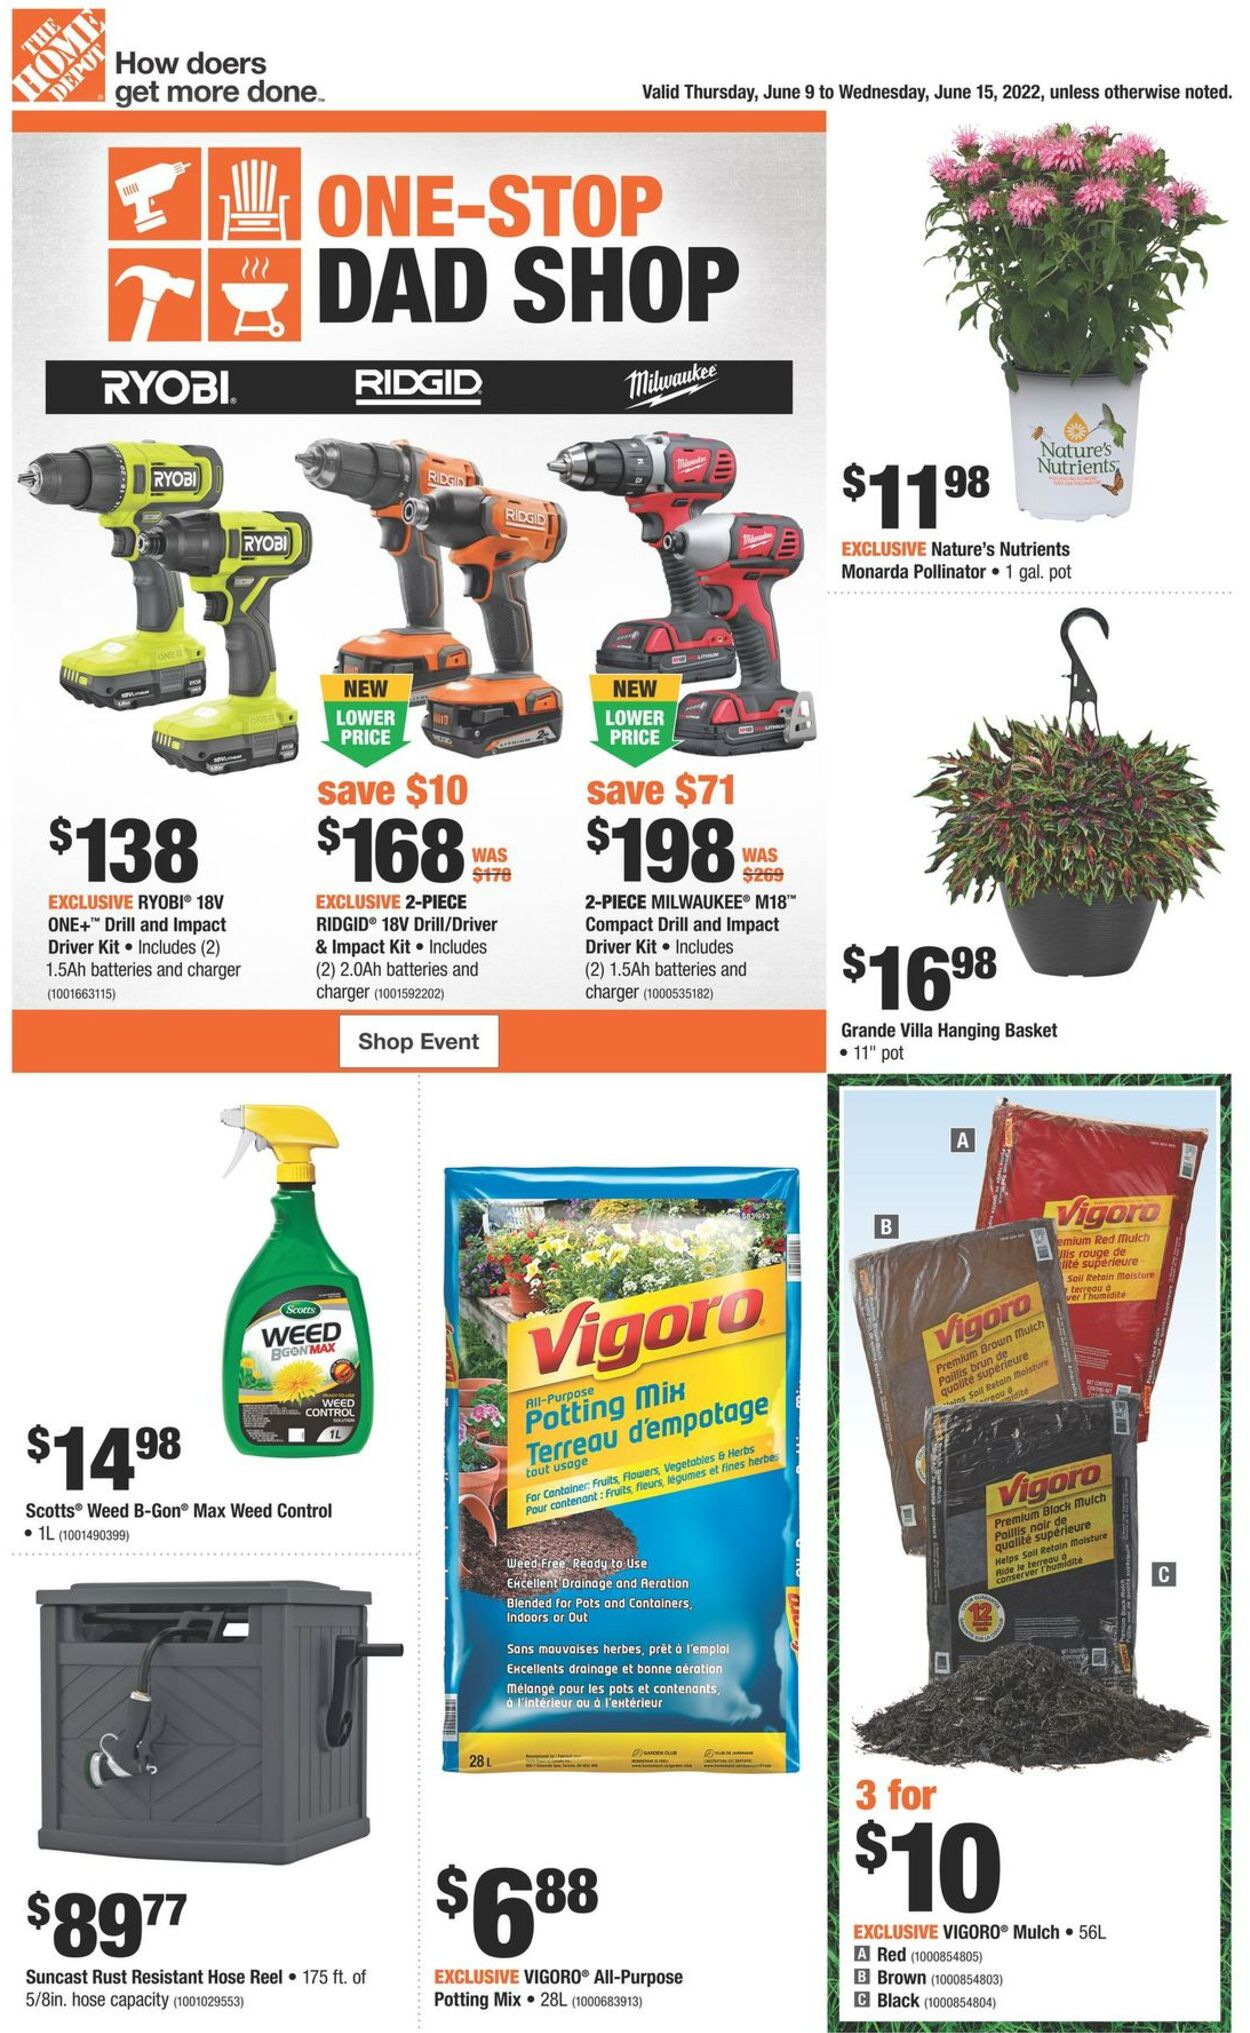 Home Depot Promotional Flyer Father's Day 2022 Valid from 09.06 to